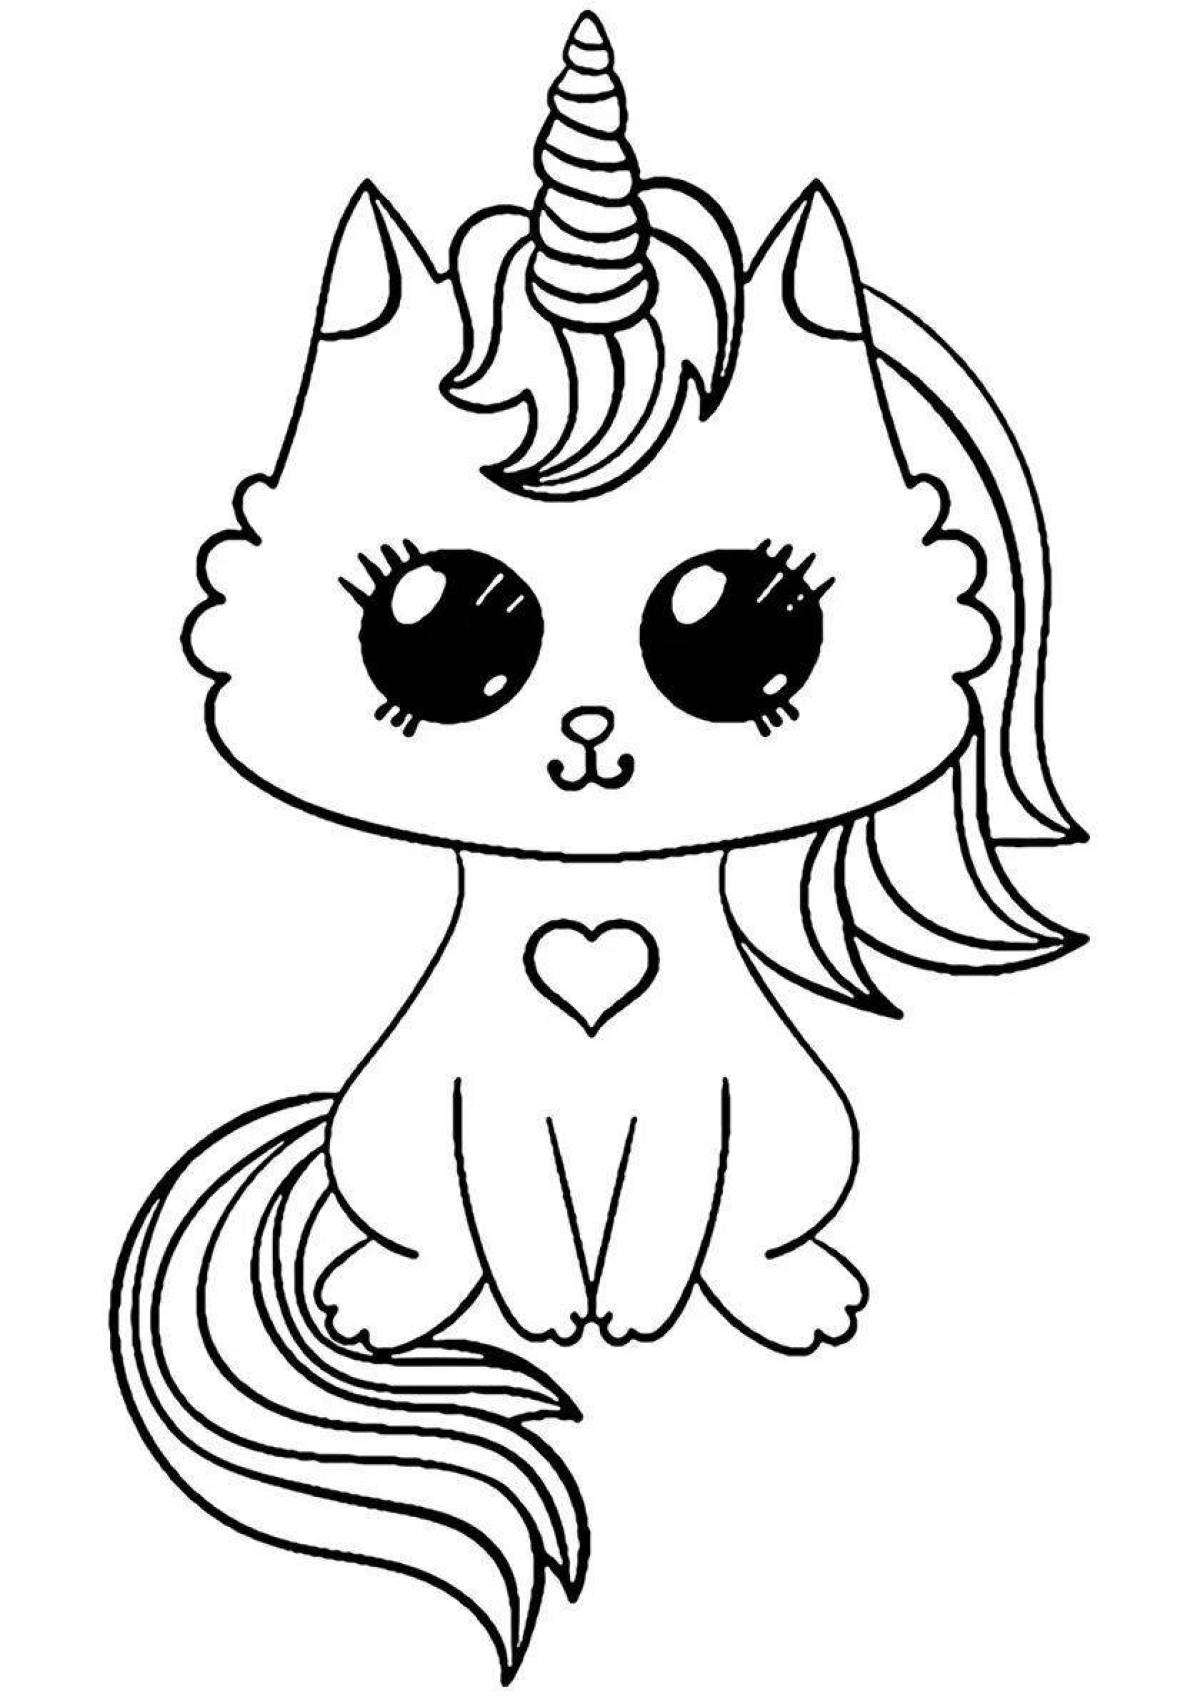 Vivacious coloring page is the cutest in the world